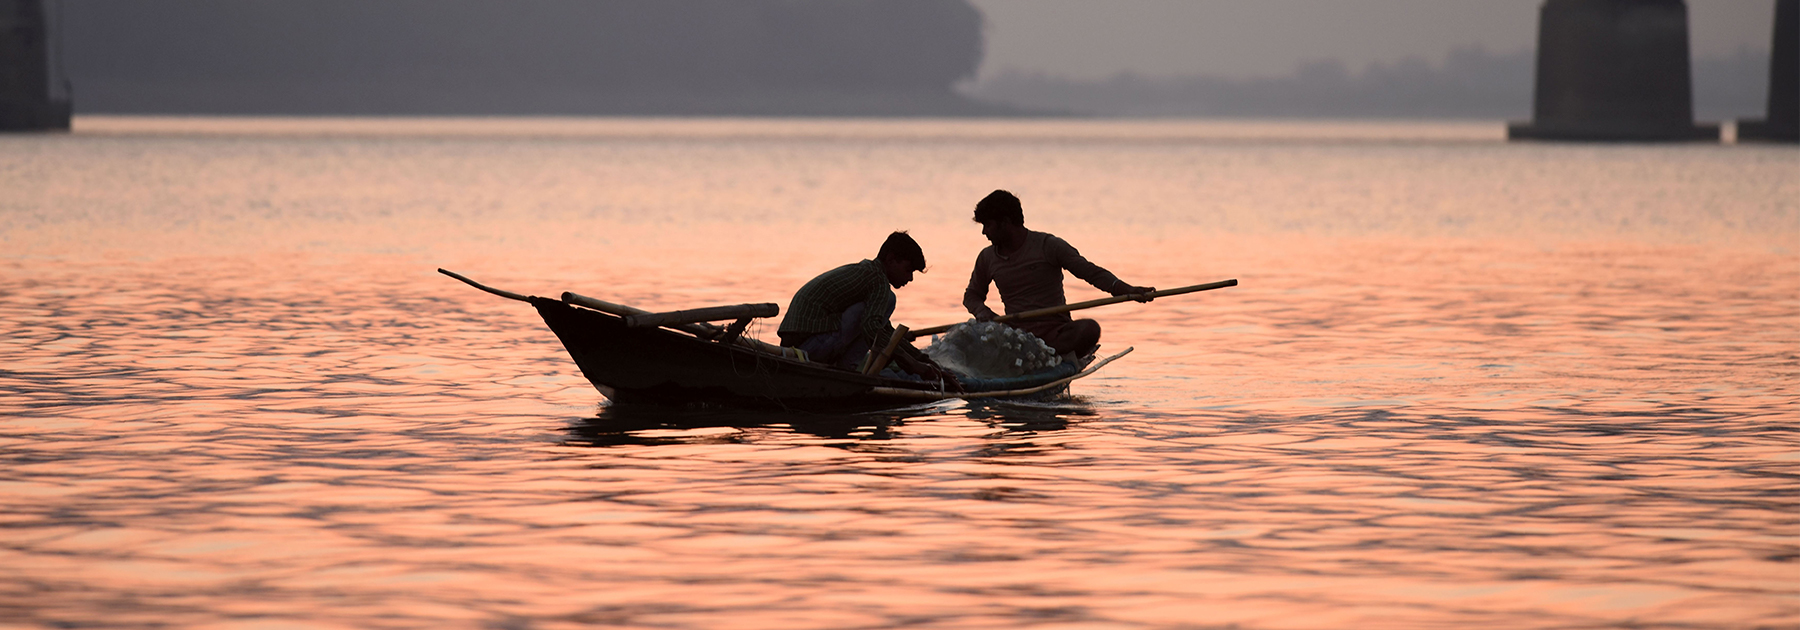 Fishermen paddle their boats back after fishing in the Brahmaputra River on the outskirts of Guwahati. (BIJU BORO/AFP/Getty Images)